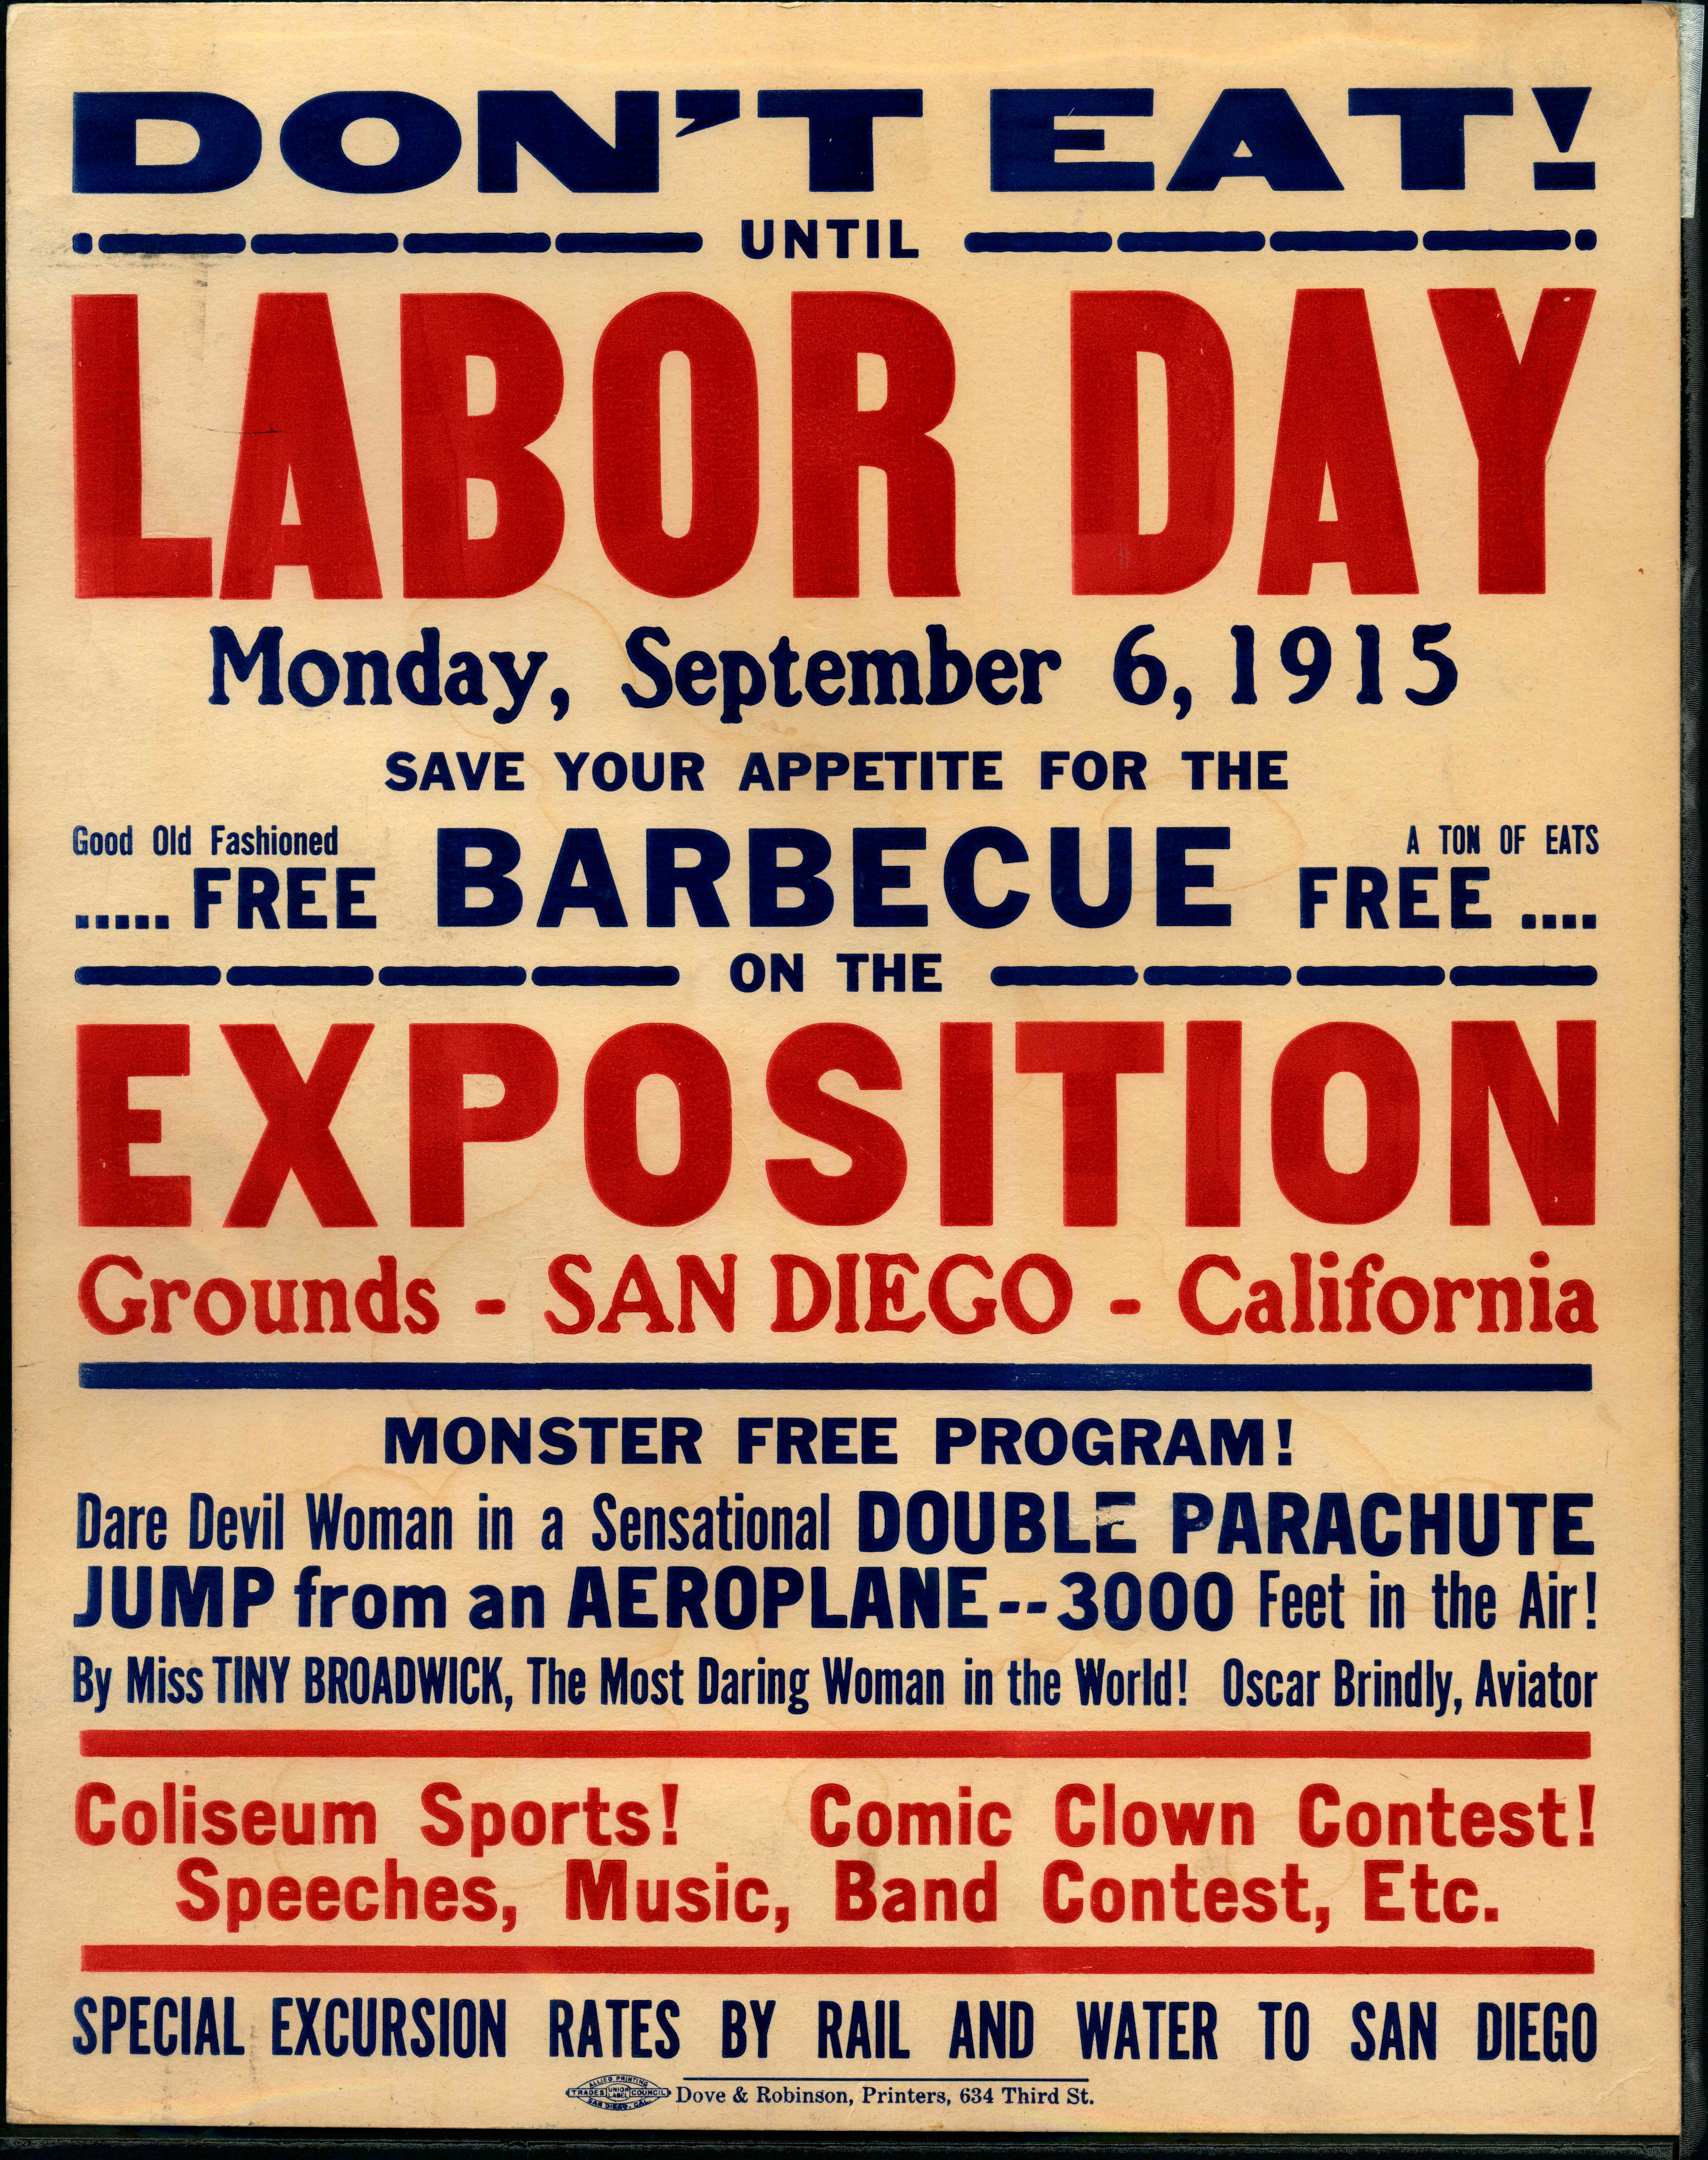 Red and Blue lettering for a Labor day barbecue